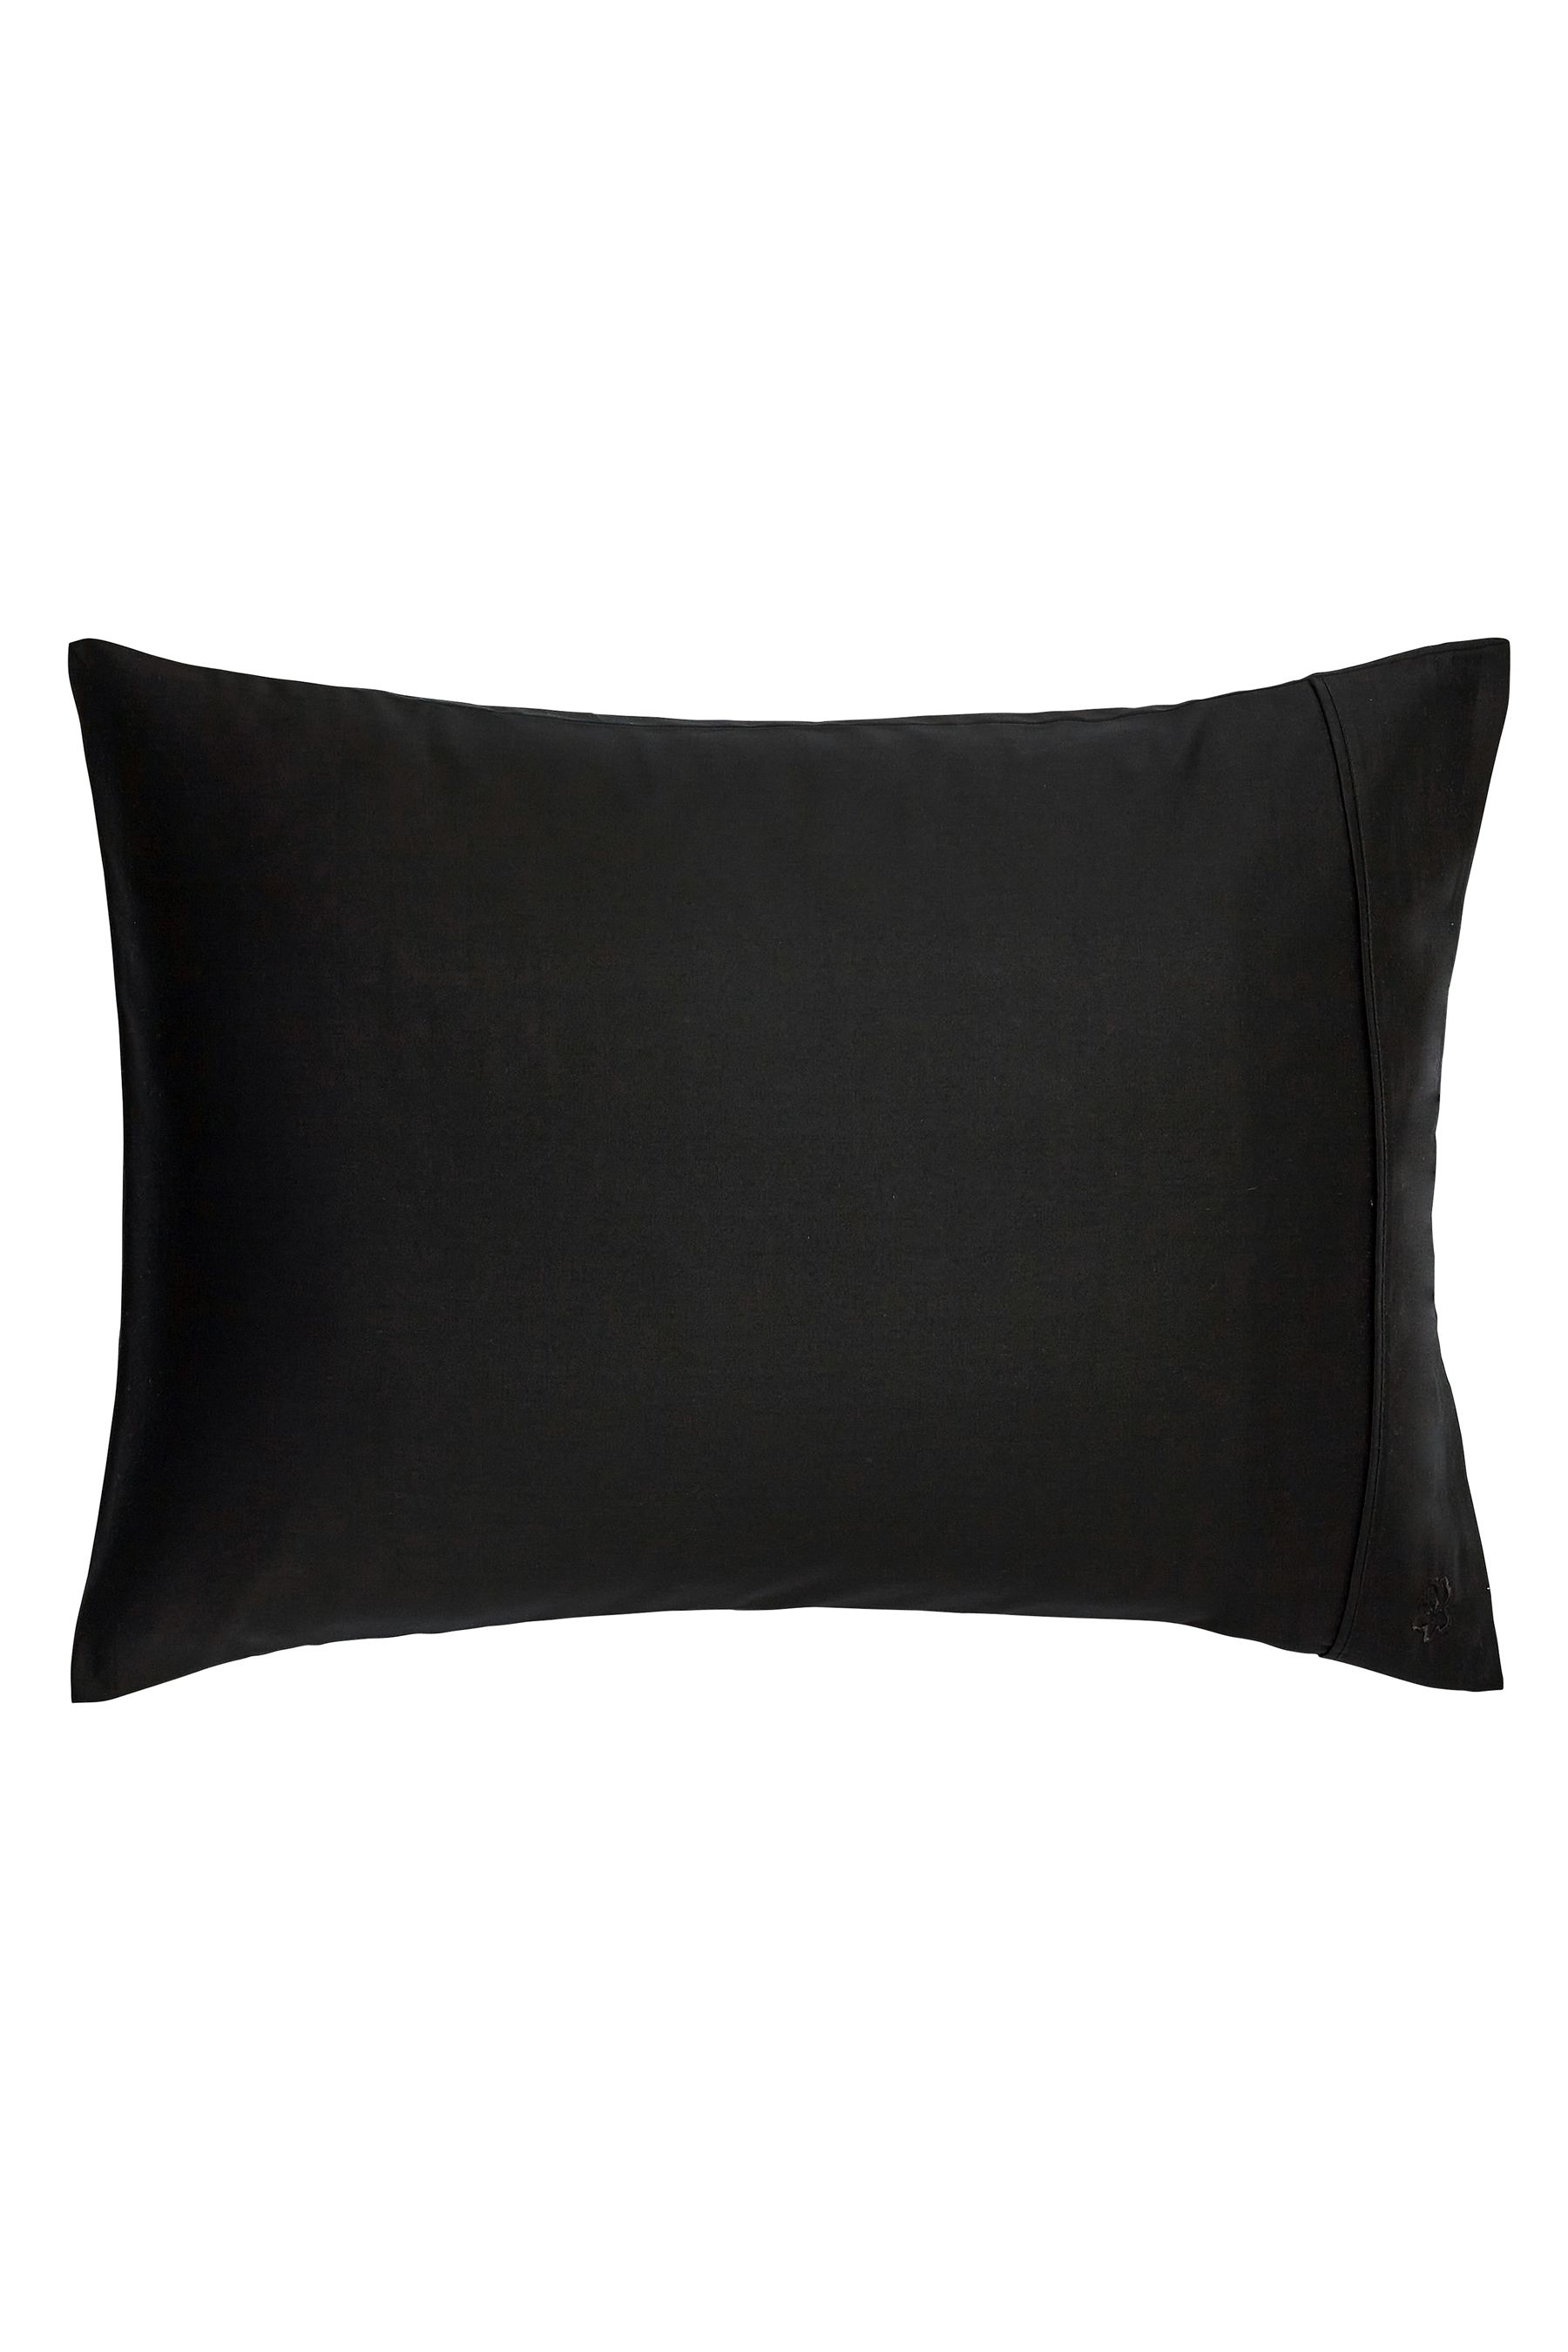 Buy Ted Baker Black Silky Smooth Plain Dye 250 Thread Count Cotton ...